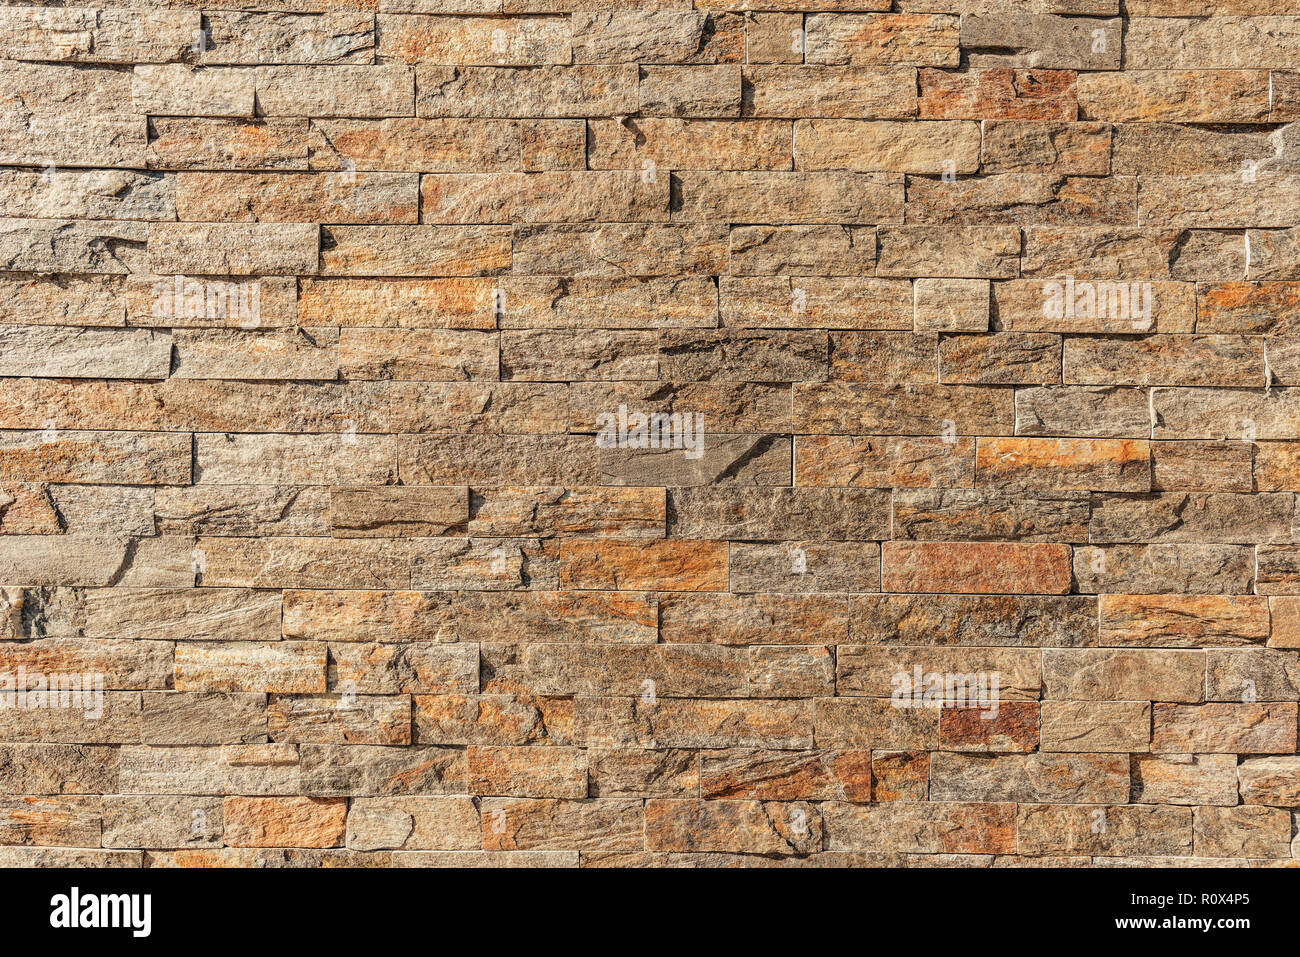 Stone accent outdoor wall surface as background Stock Photo